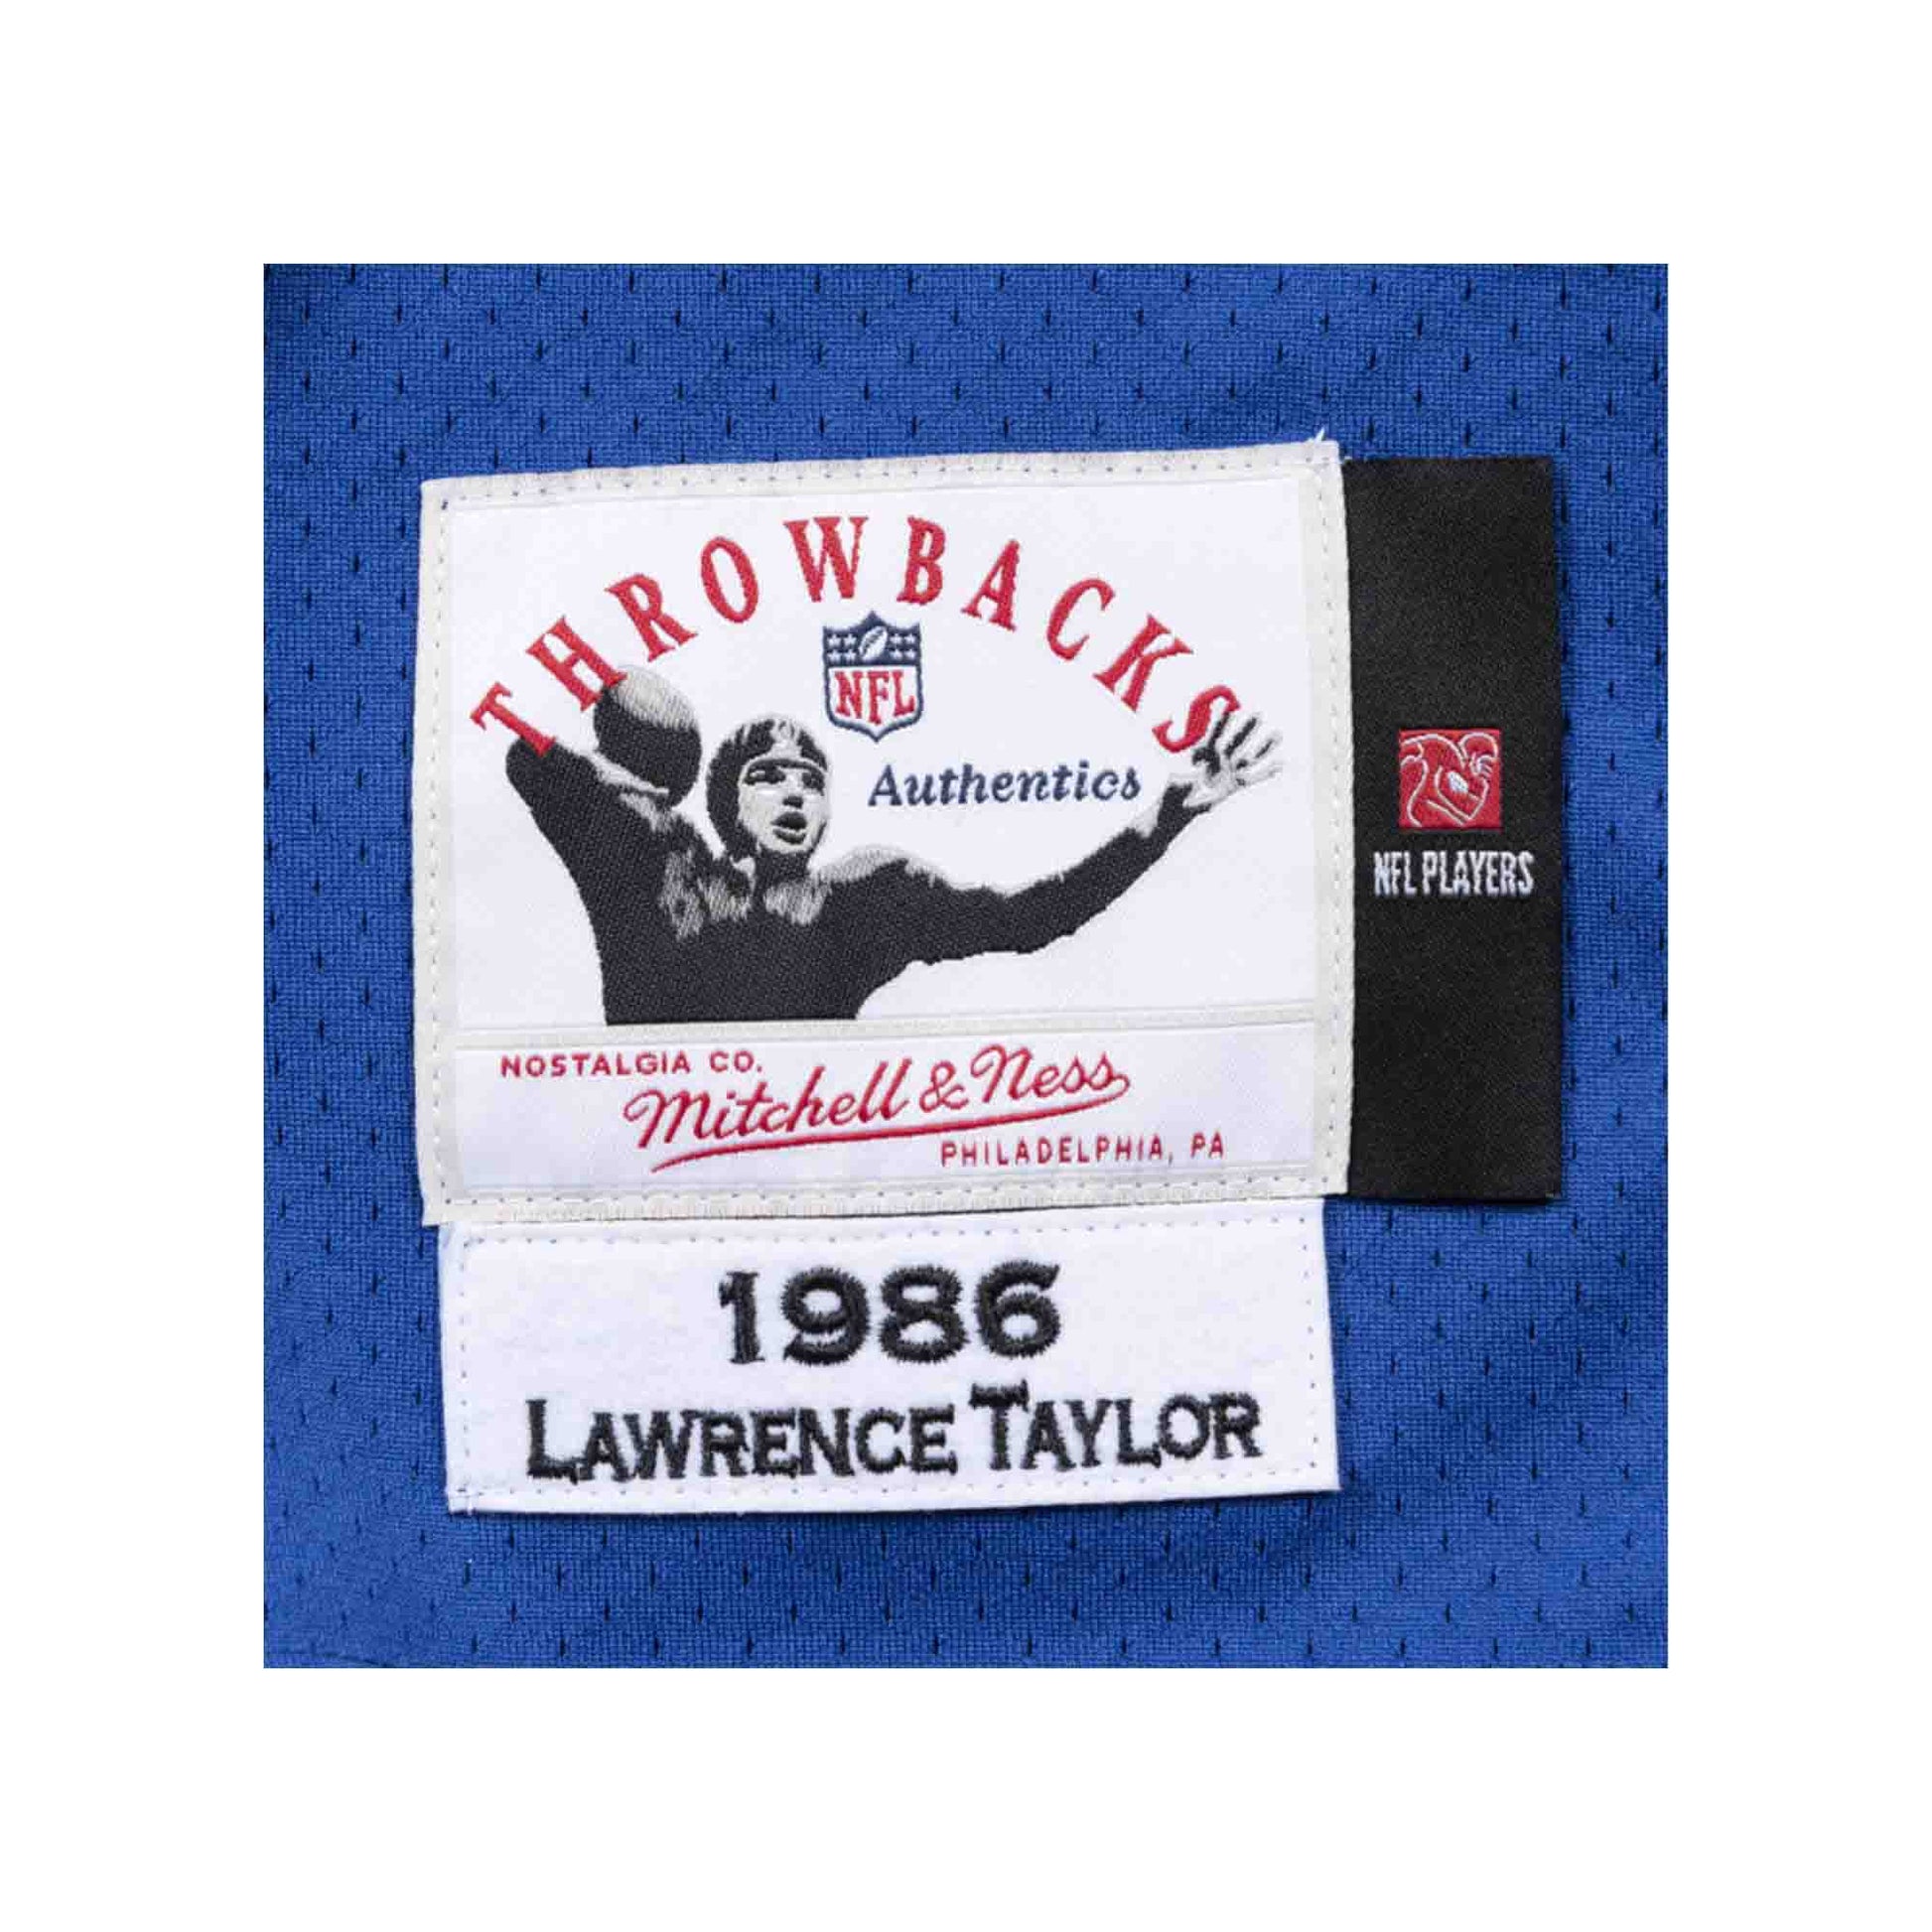 New York Giants football jersey men size L #56 Lawrence Taylor